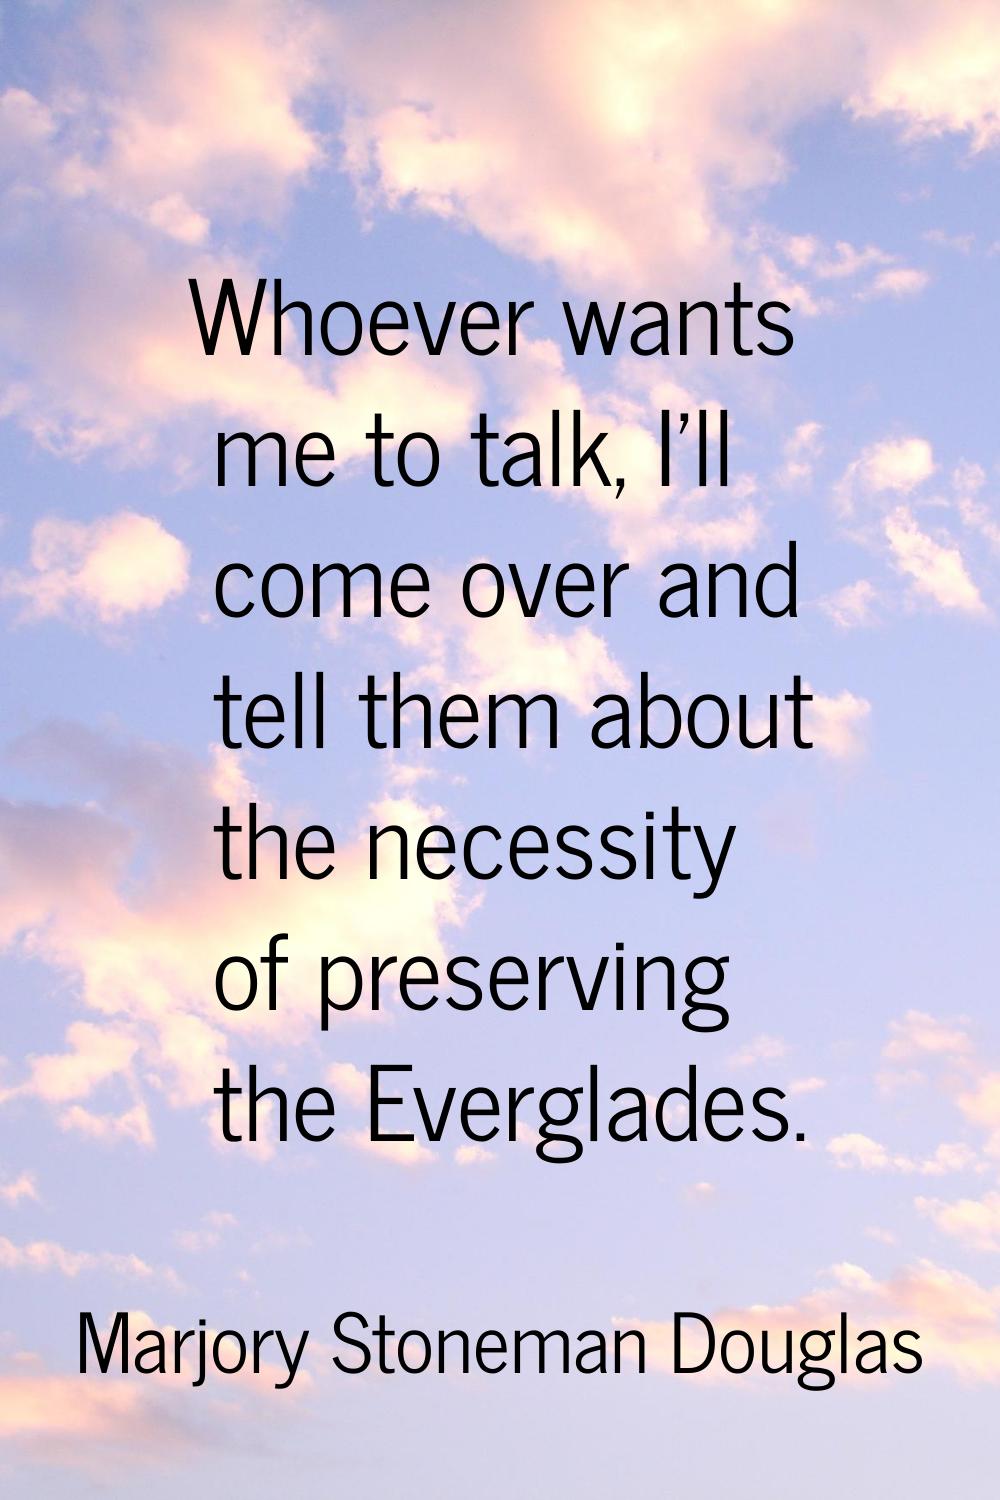 Whoever wants me to talk, I'll come over and tell them about the necessity of preserving the Evergl